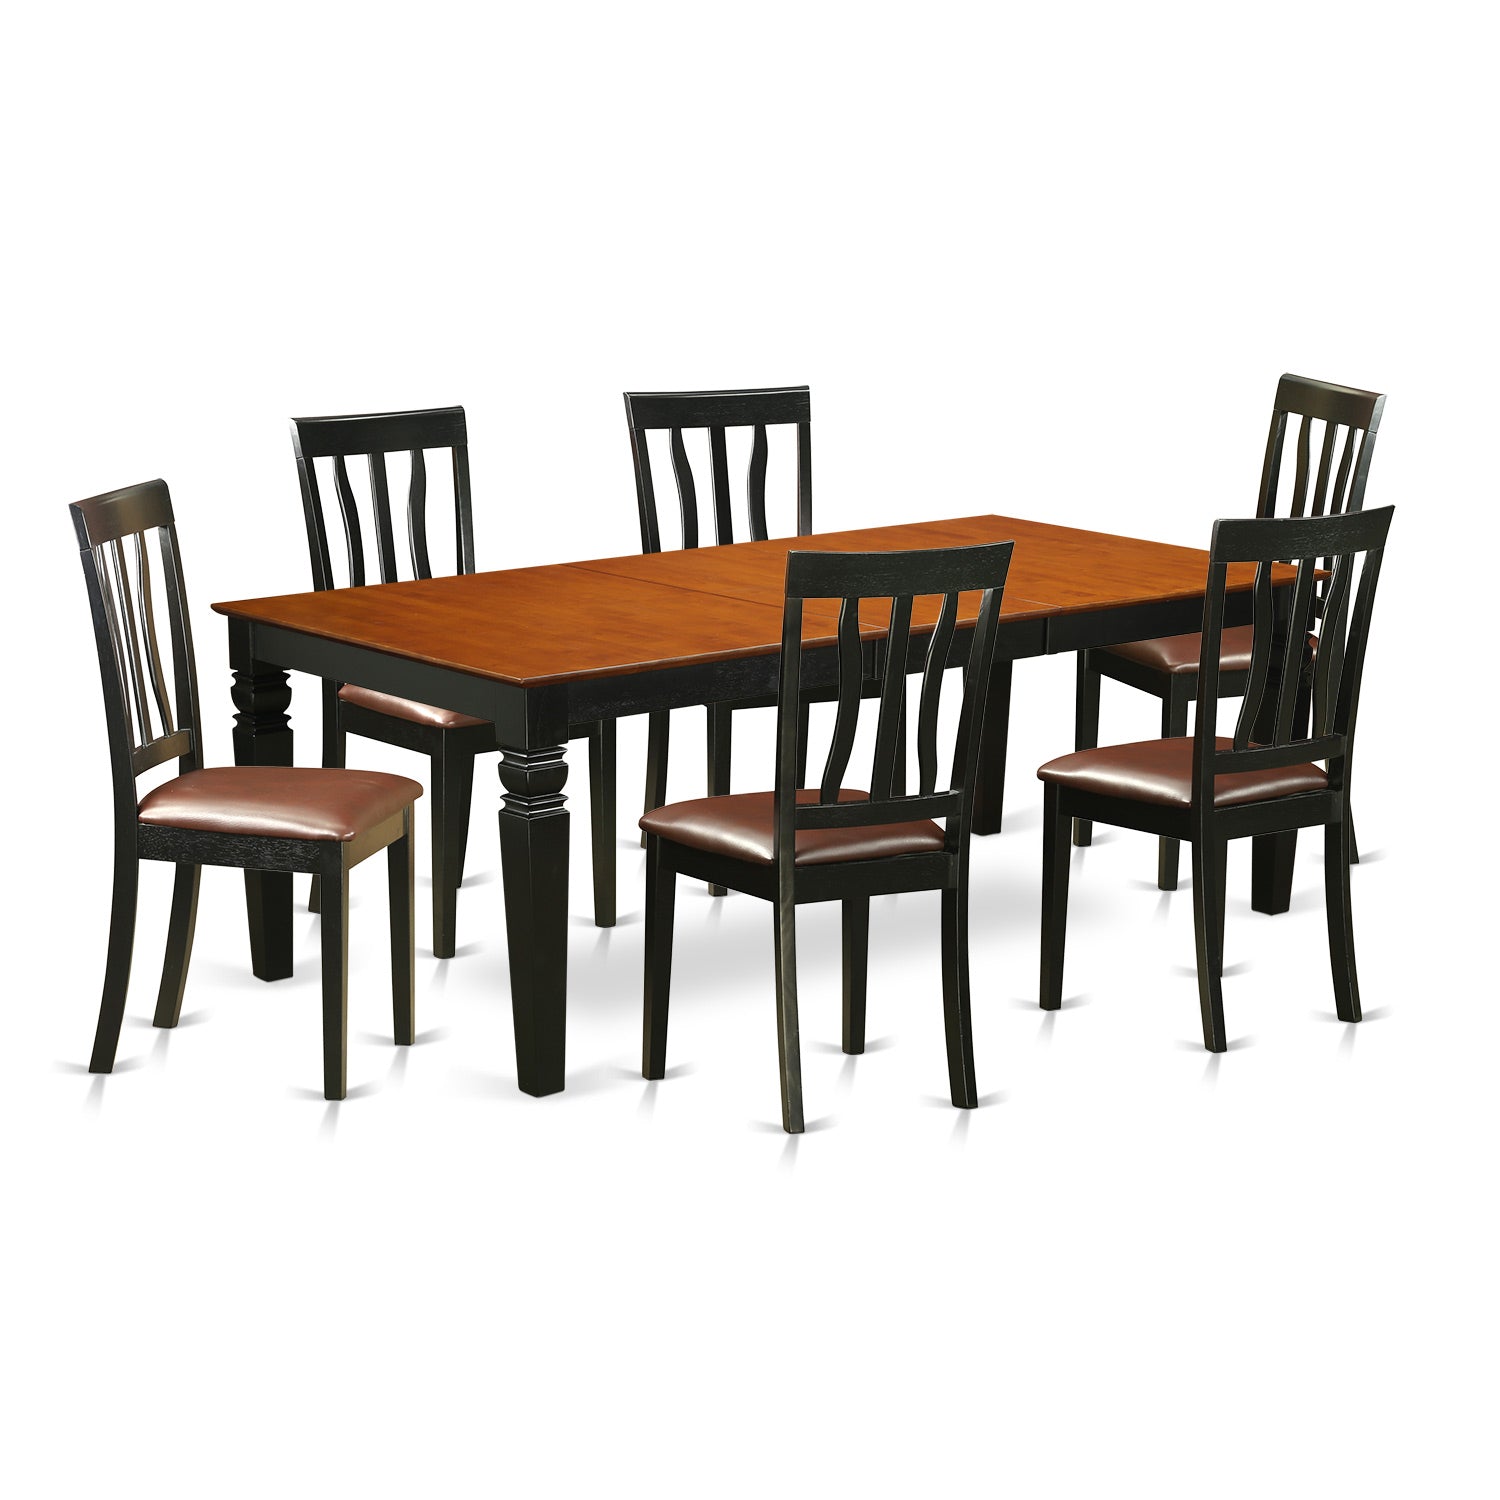 LGAN7-BCH-LC 7 Pc Table set with a Dining Table and 6 Dining Chairs in Black and Cherry